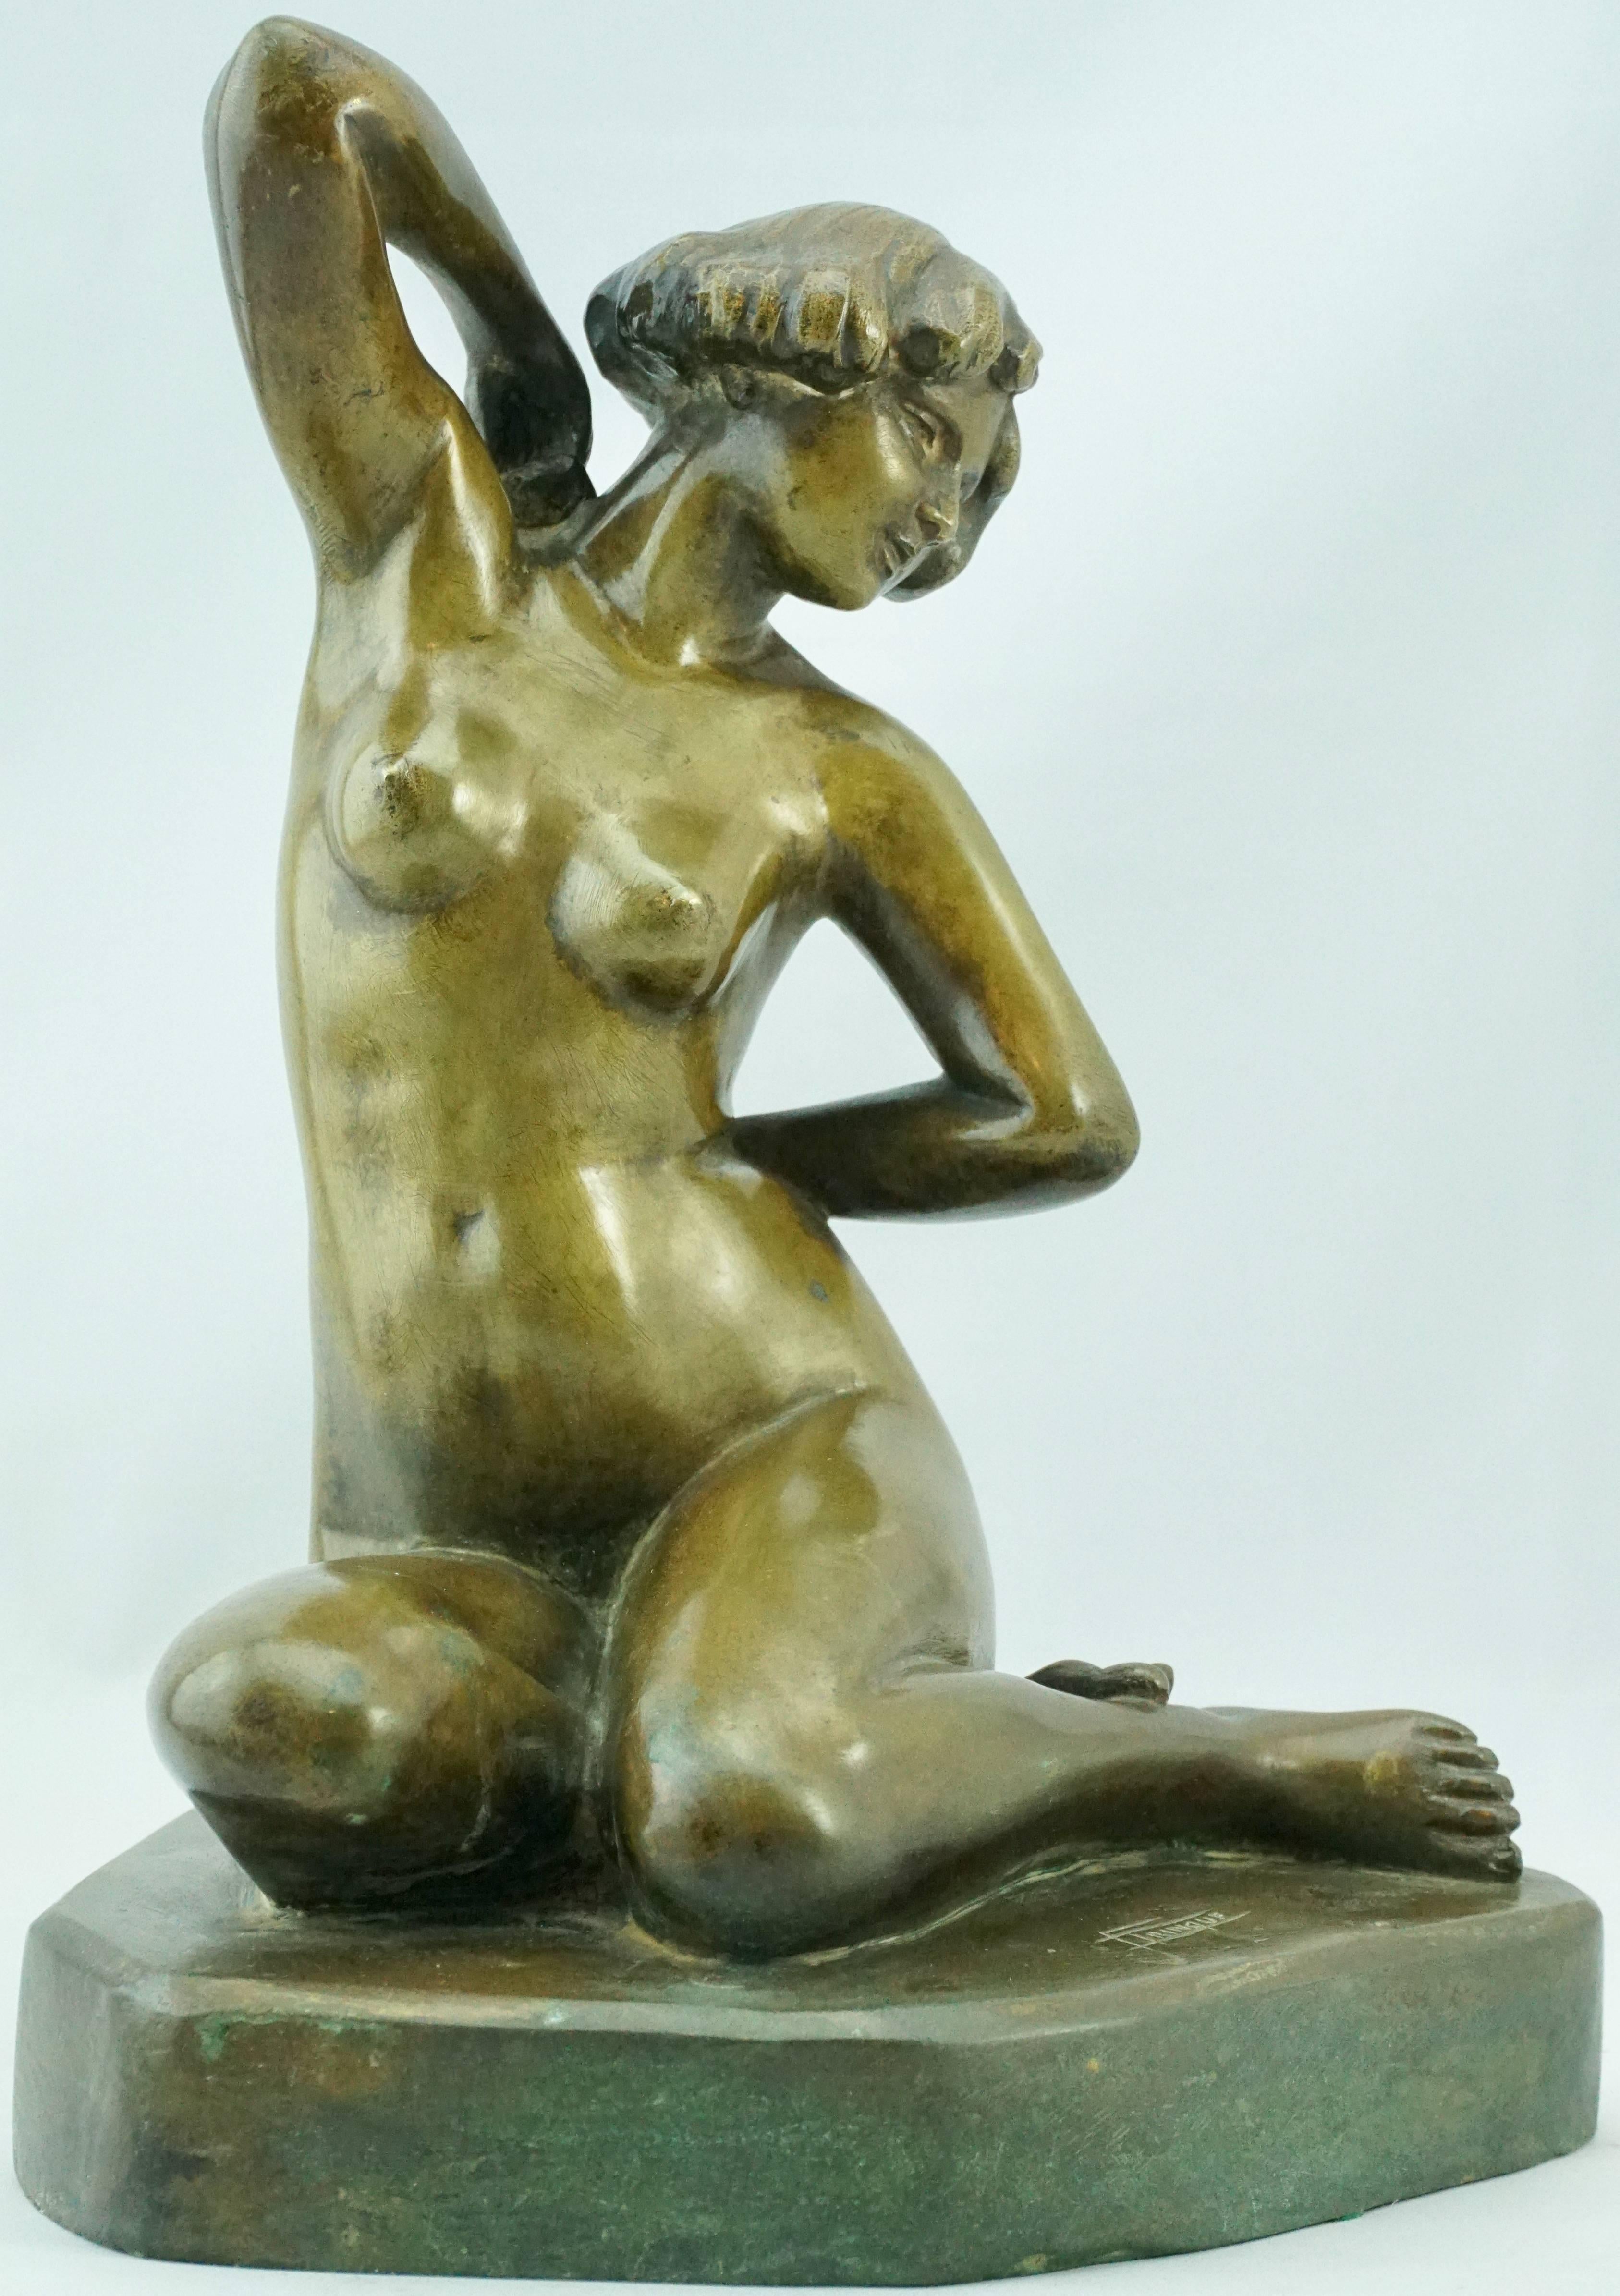 Charming French Art Deco Bronze Nude by F. Trinque, 1930 - Sculpture by Unknown